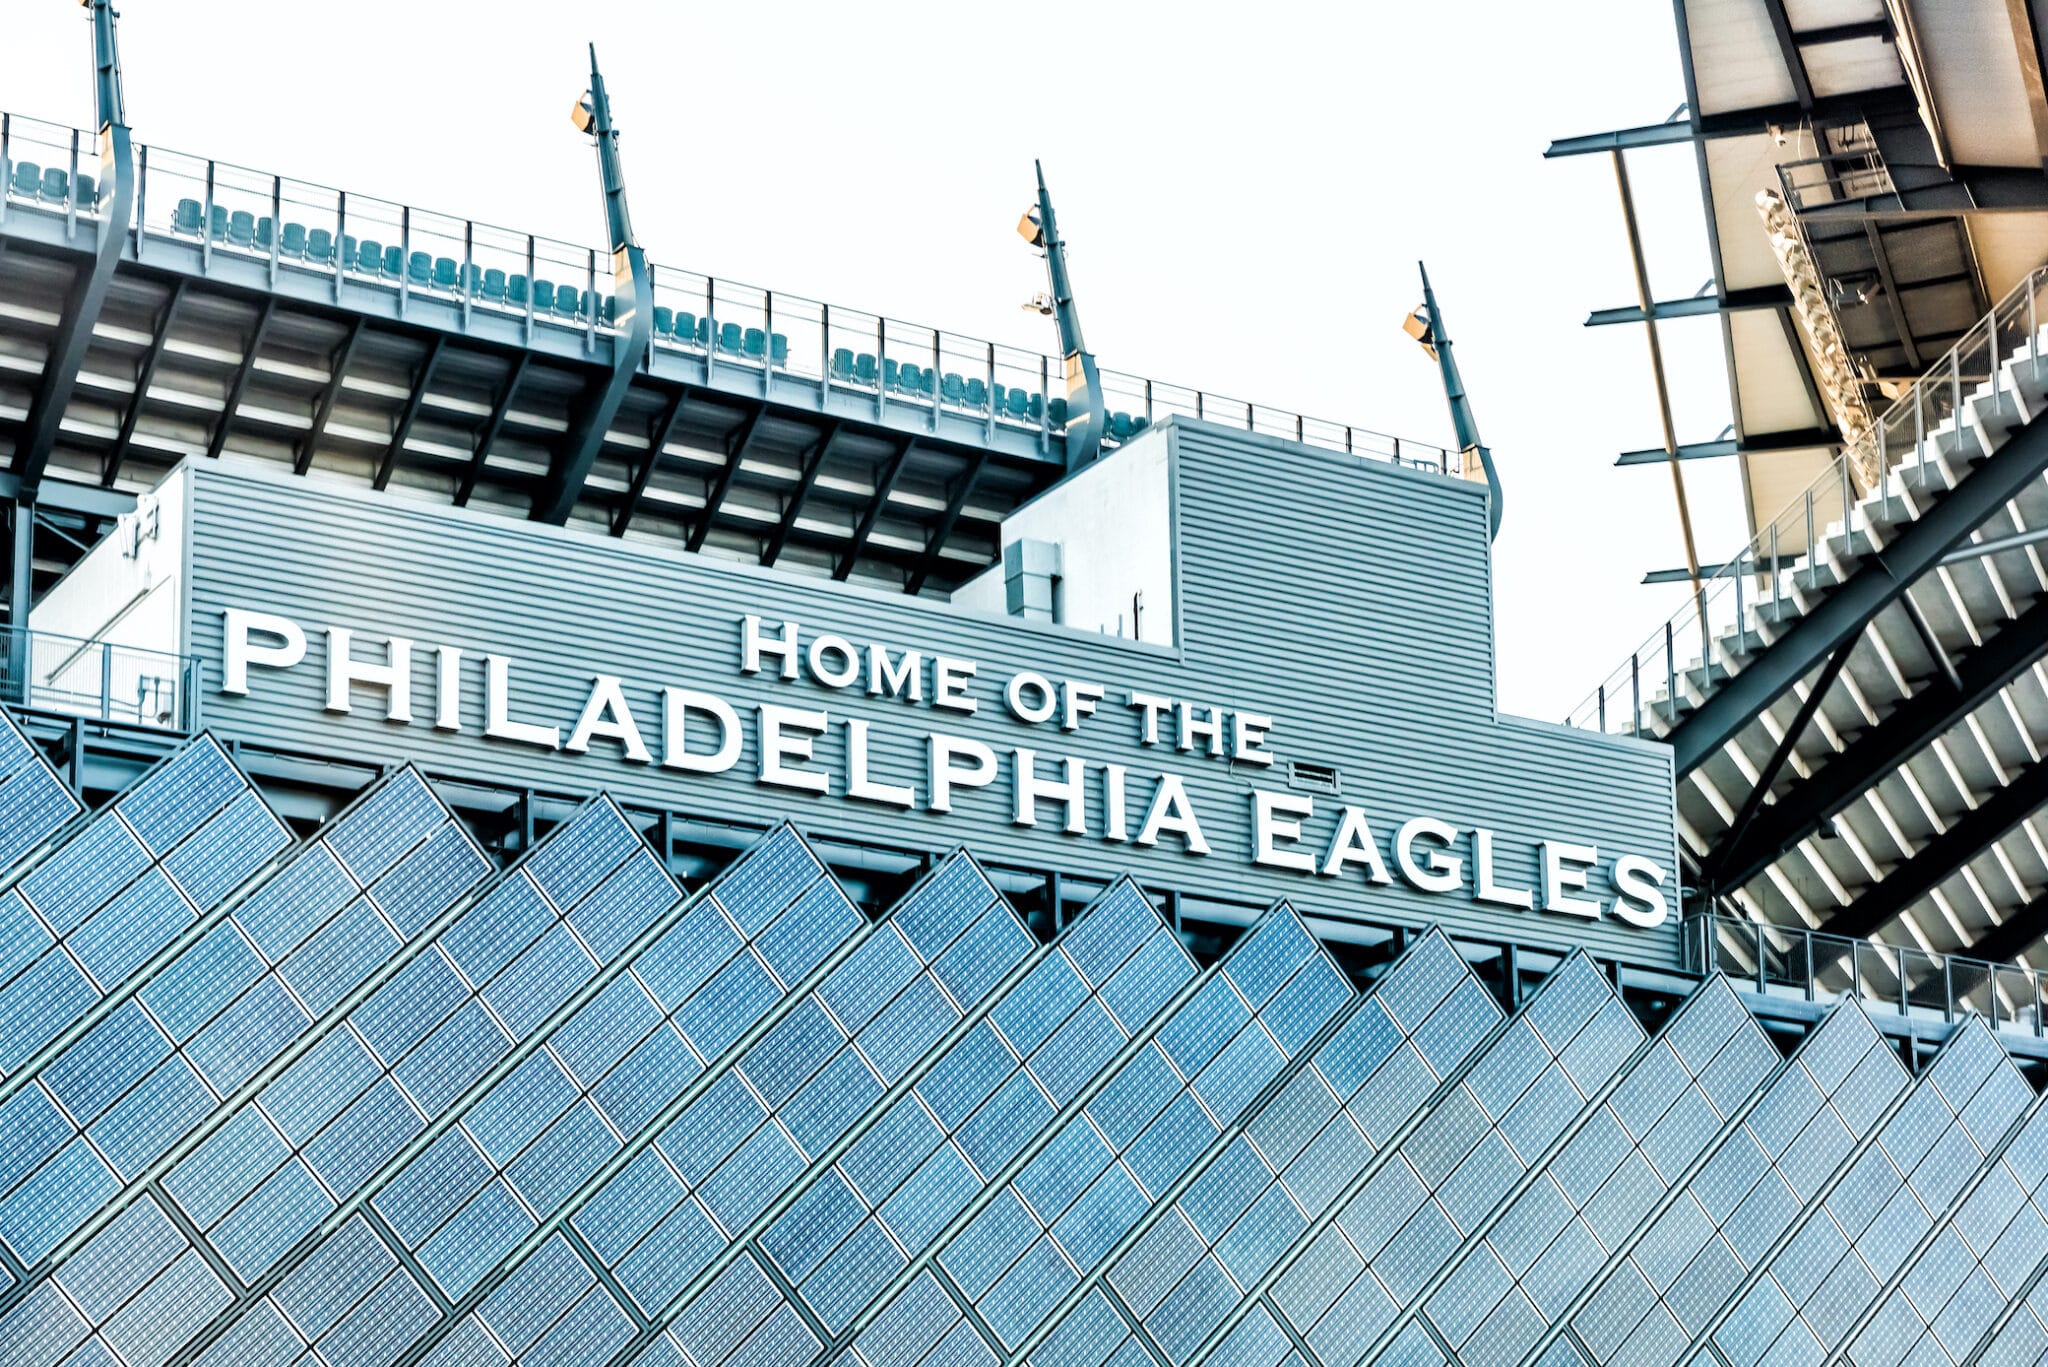 Security At Eagles’ Game Questioned In Case Involving Injured Cowboys’ Fan